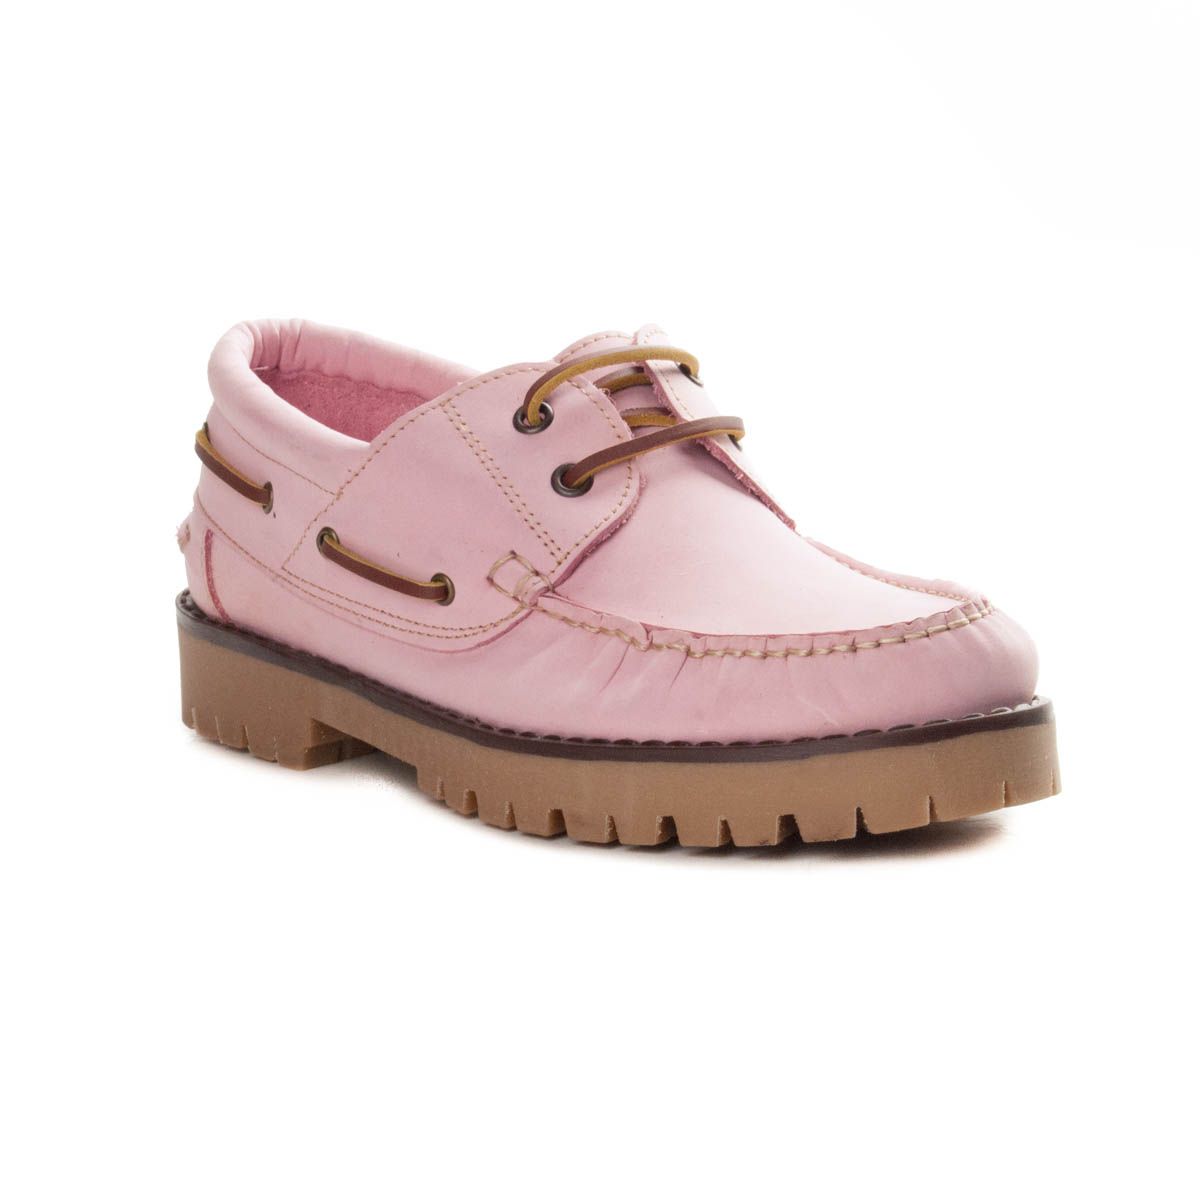 Nautical woman's shoe, made in leather, special because of her softness and comfort. Light rubber sole. Anti-slip floor. Fastened with cords. A shoe camper but at the same time stylish, ideal for day to day. So comfortable you always want to take it.